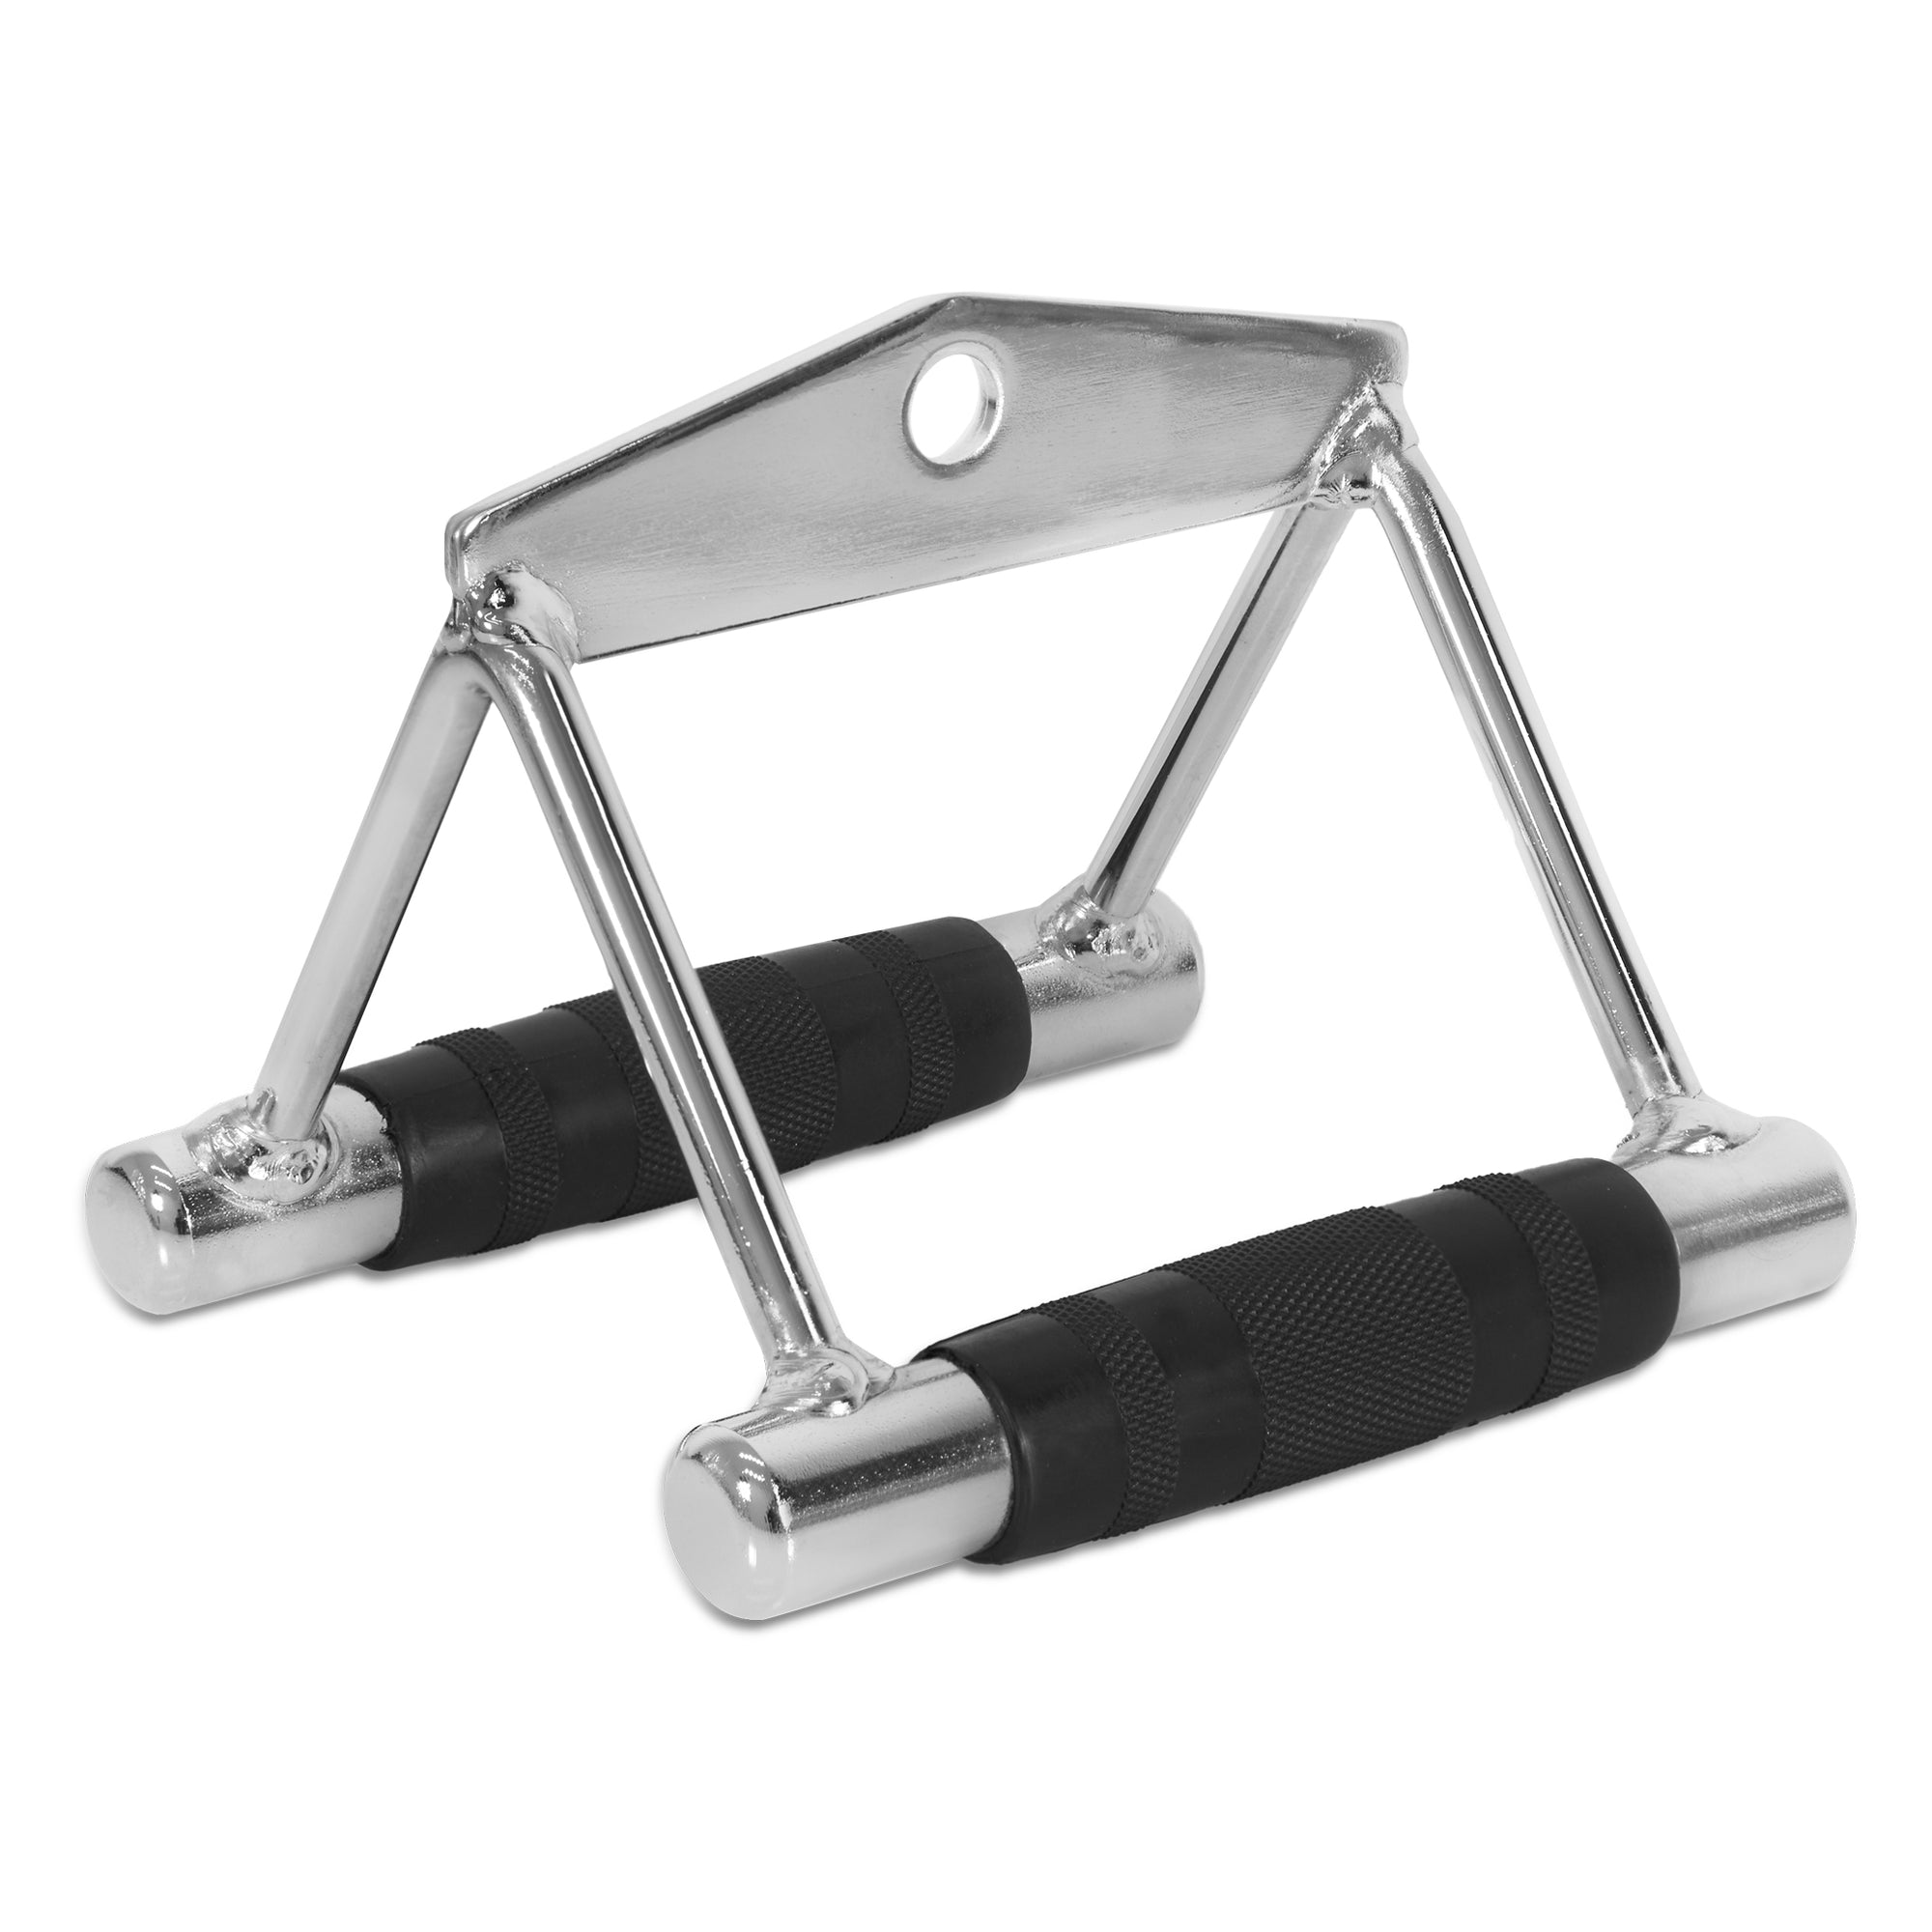 Seated Row Cable Attachment